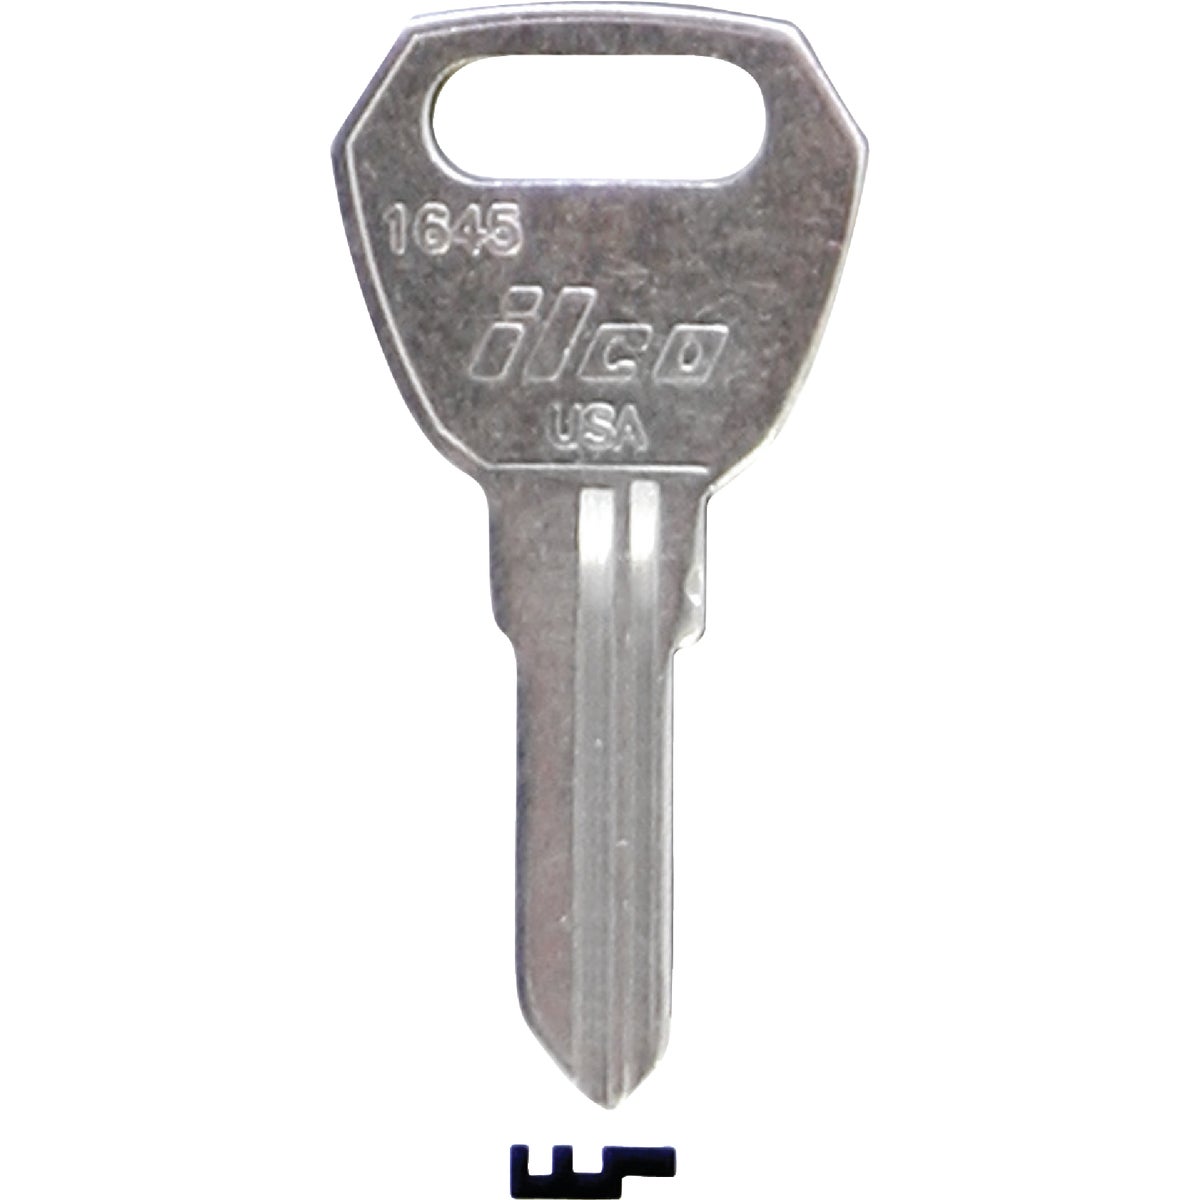 Item 235882, Nickel-plated key blank. When you order one, you will receive 10 keys.